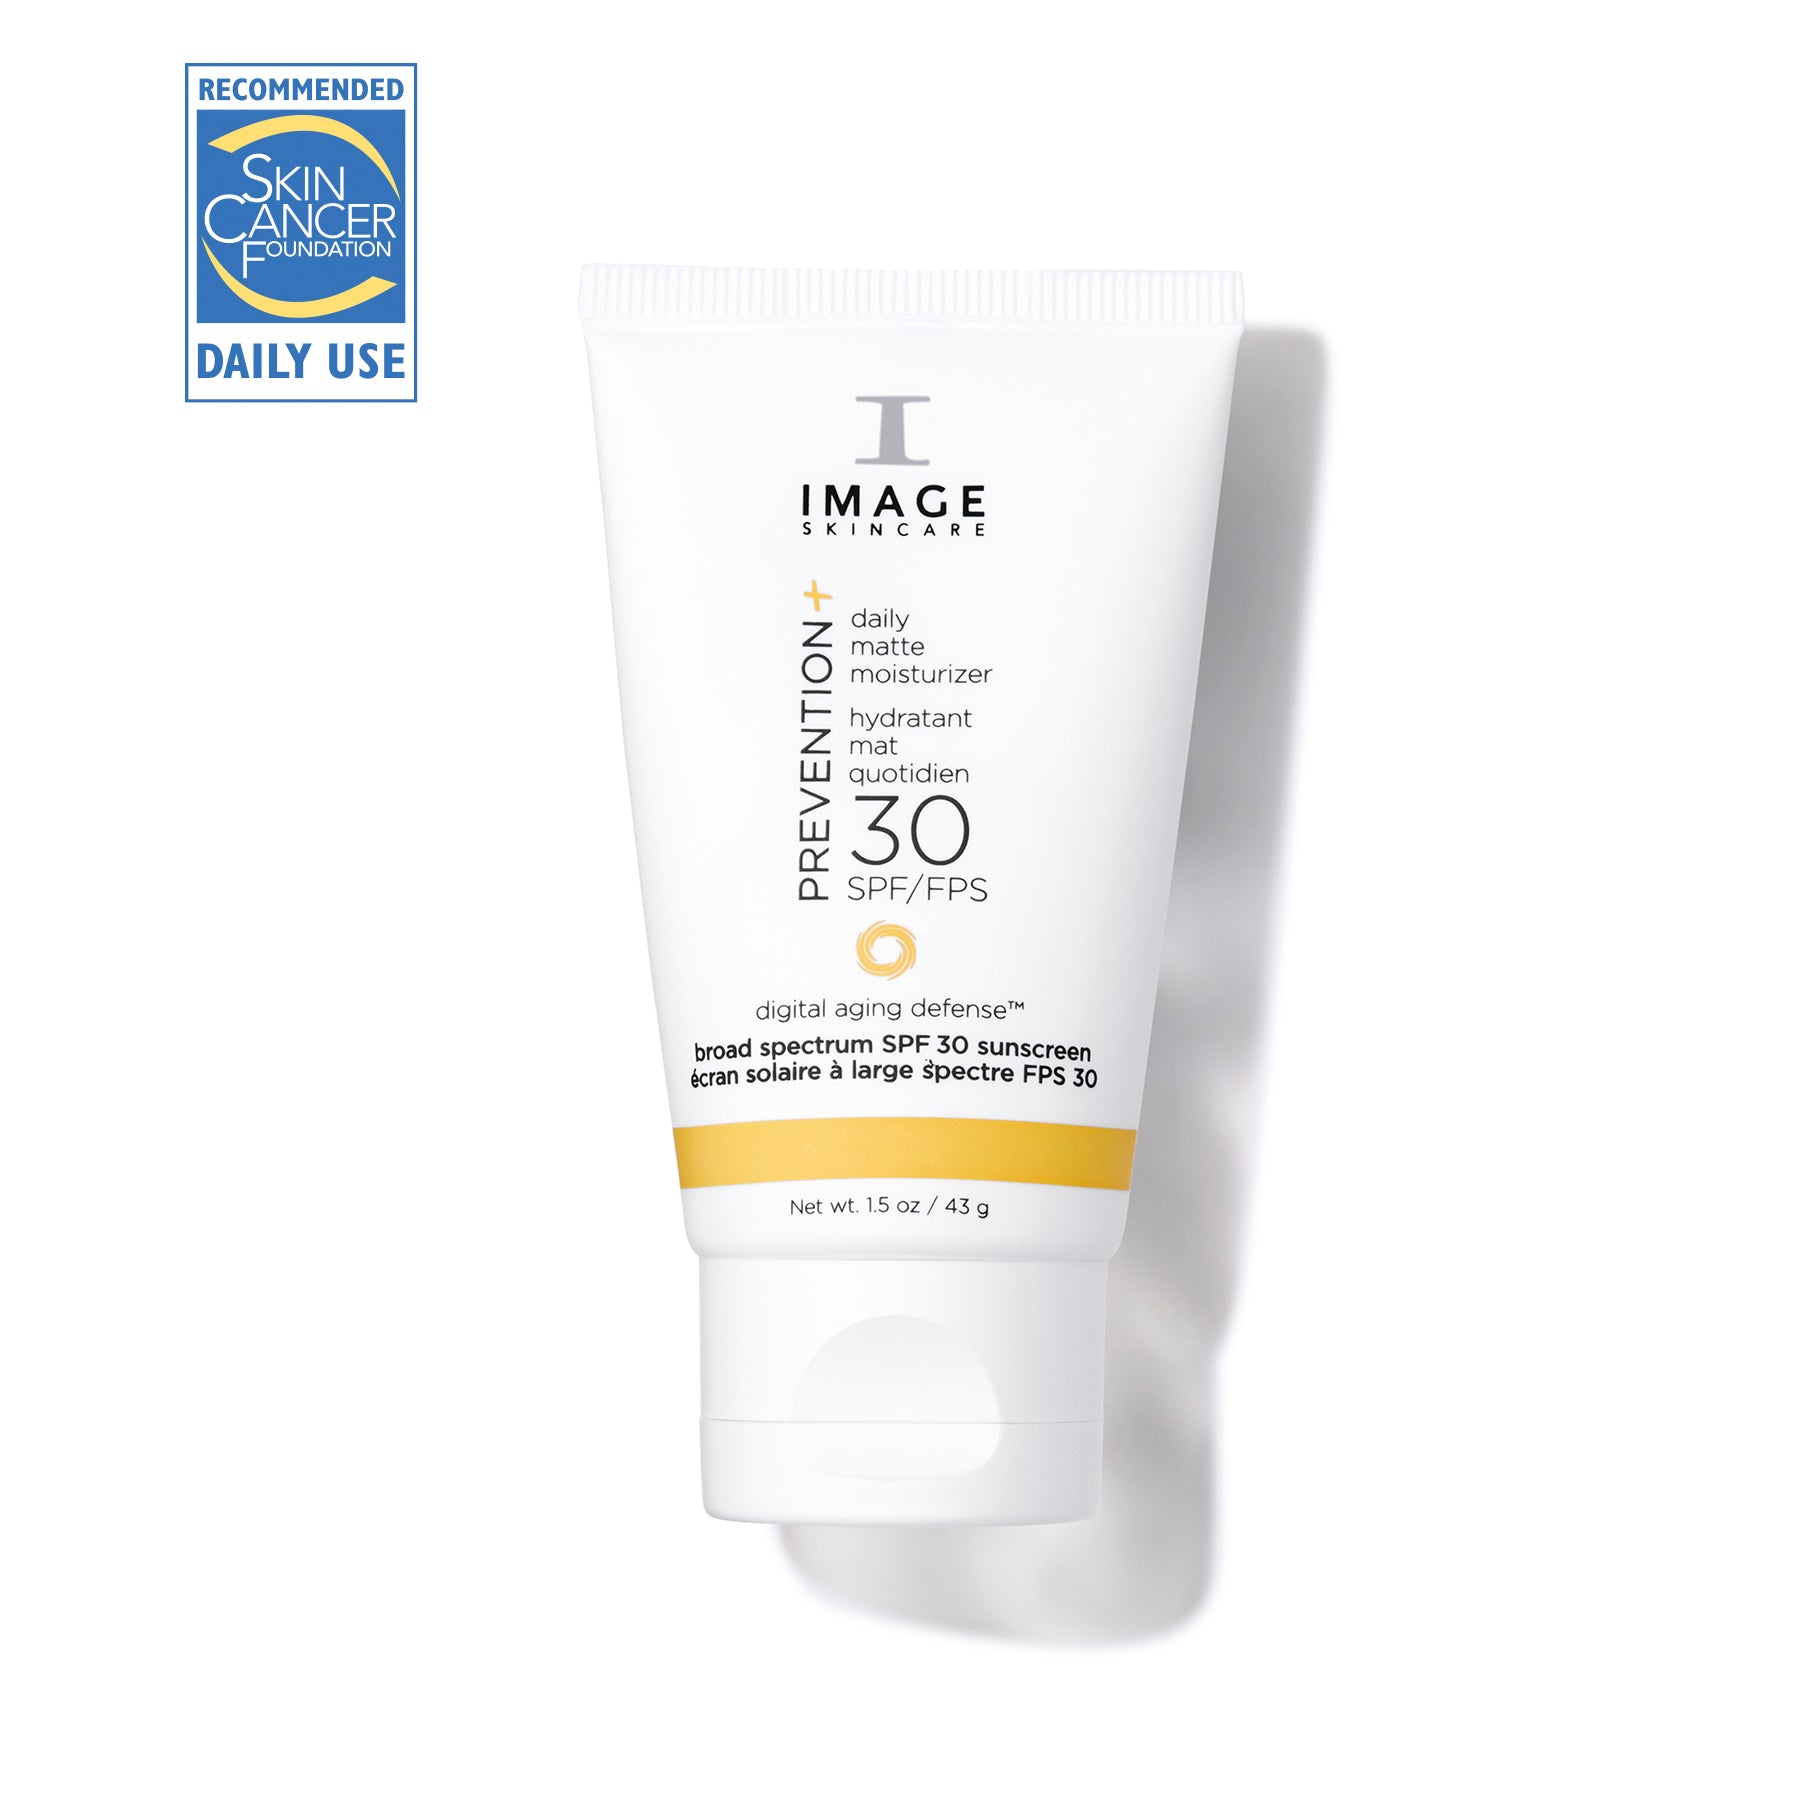 Discovery-size PREVENTION+® daily matte moisturizer SPF 30